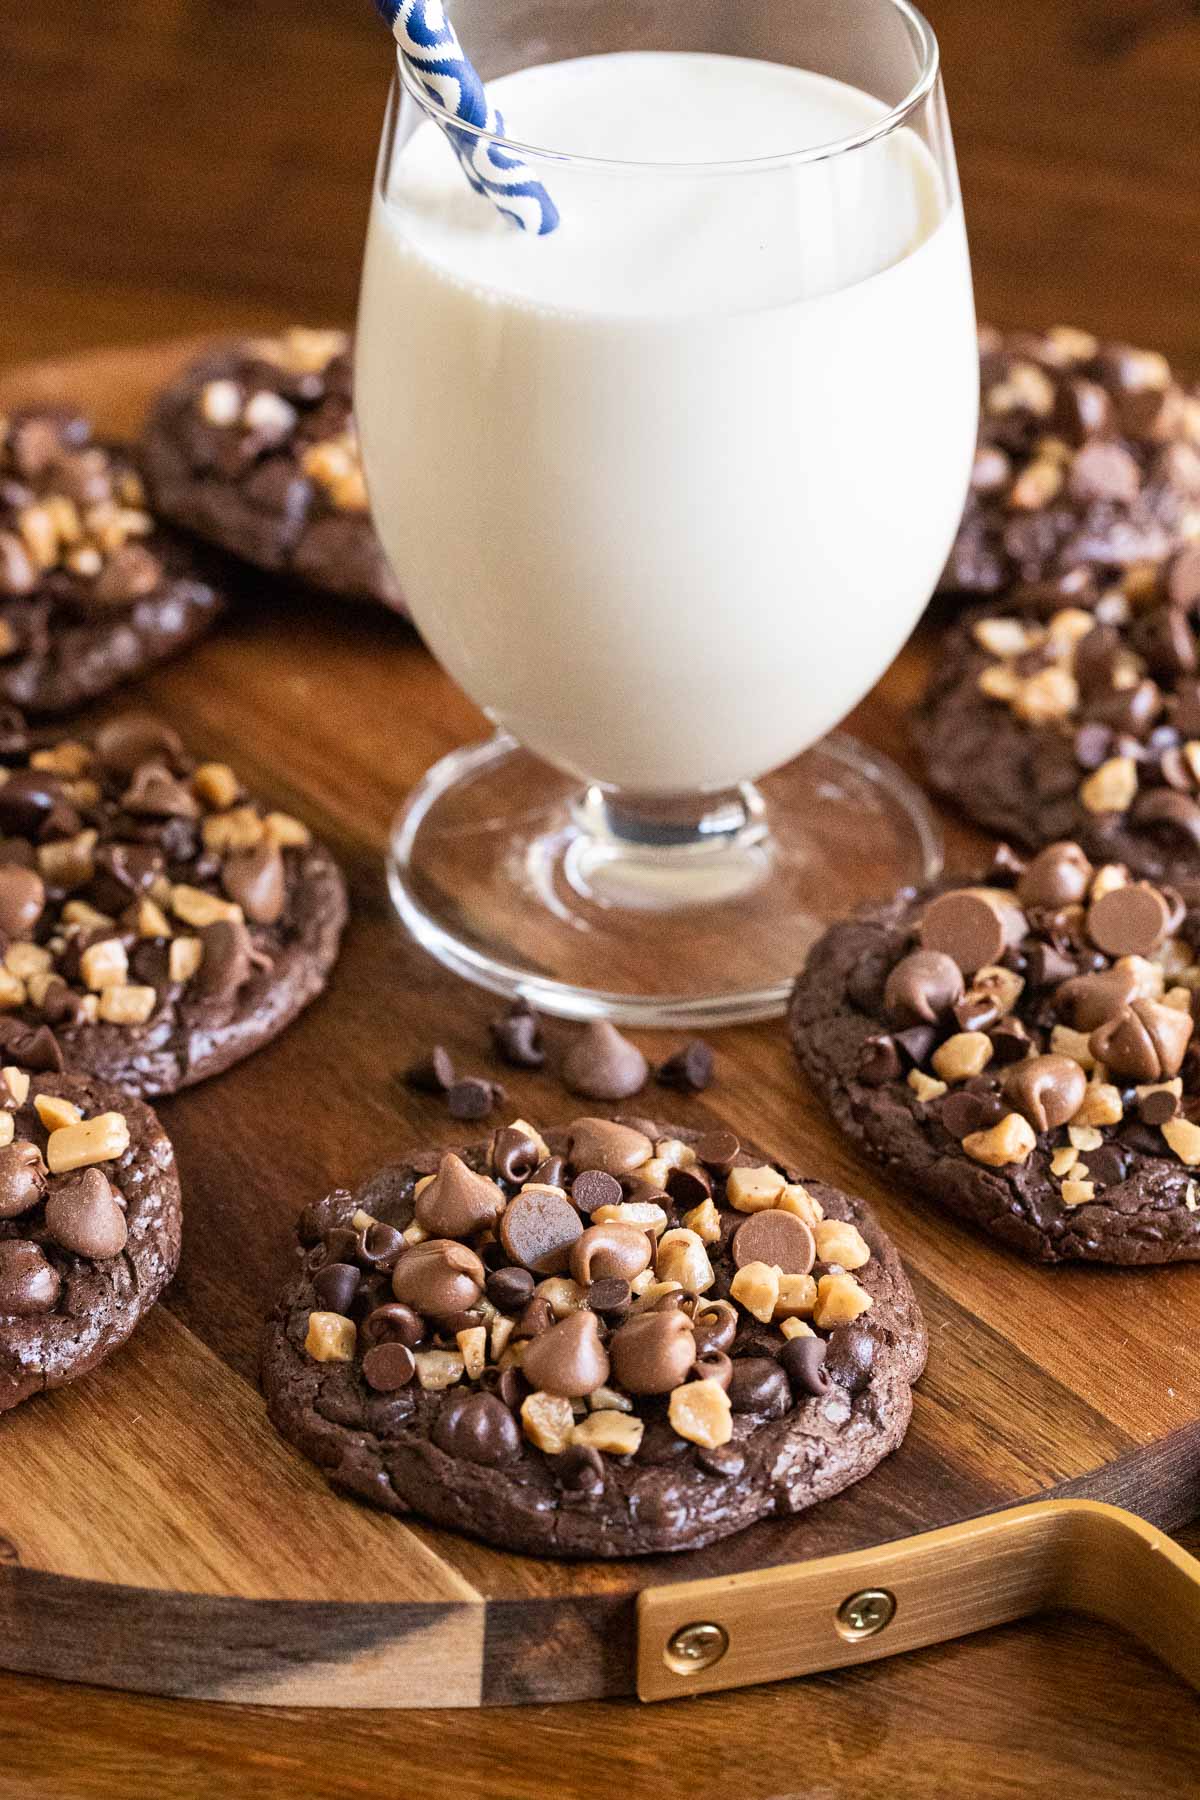 Vertical photo of a wood platter filled with Flourless Toffee Chocolate Cookies with a glass of milk in the center.